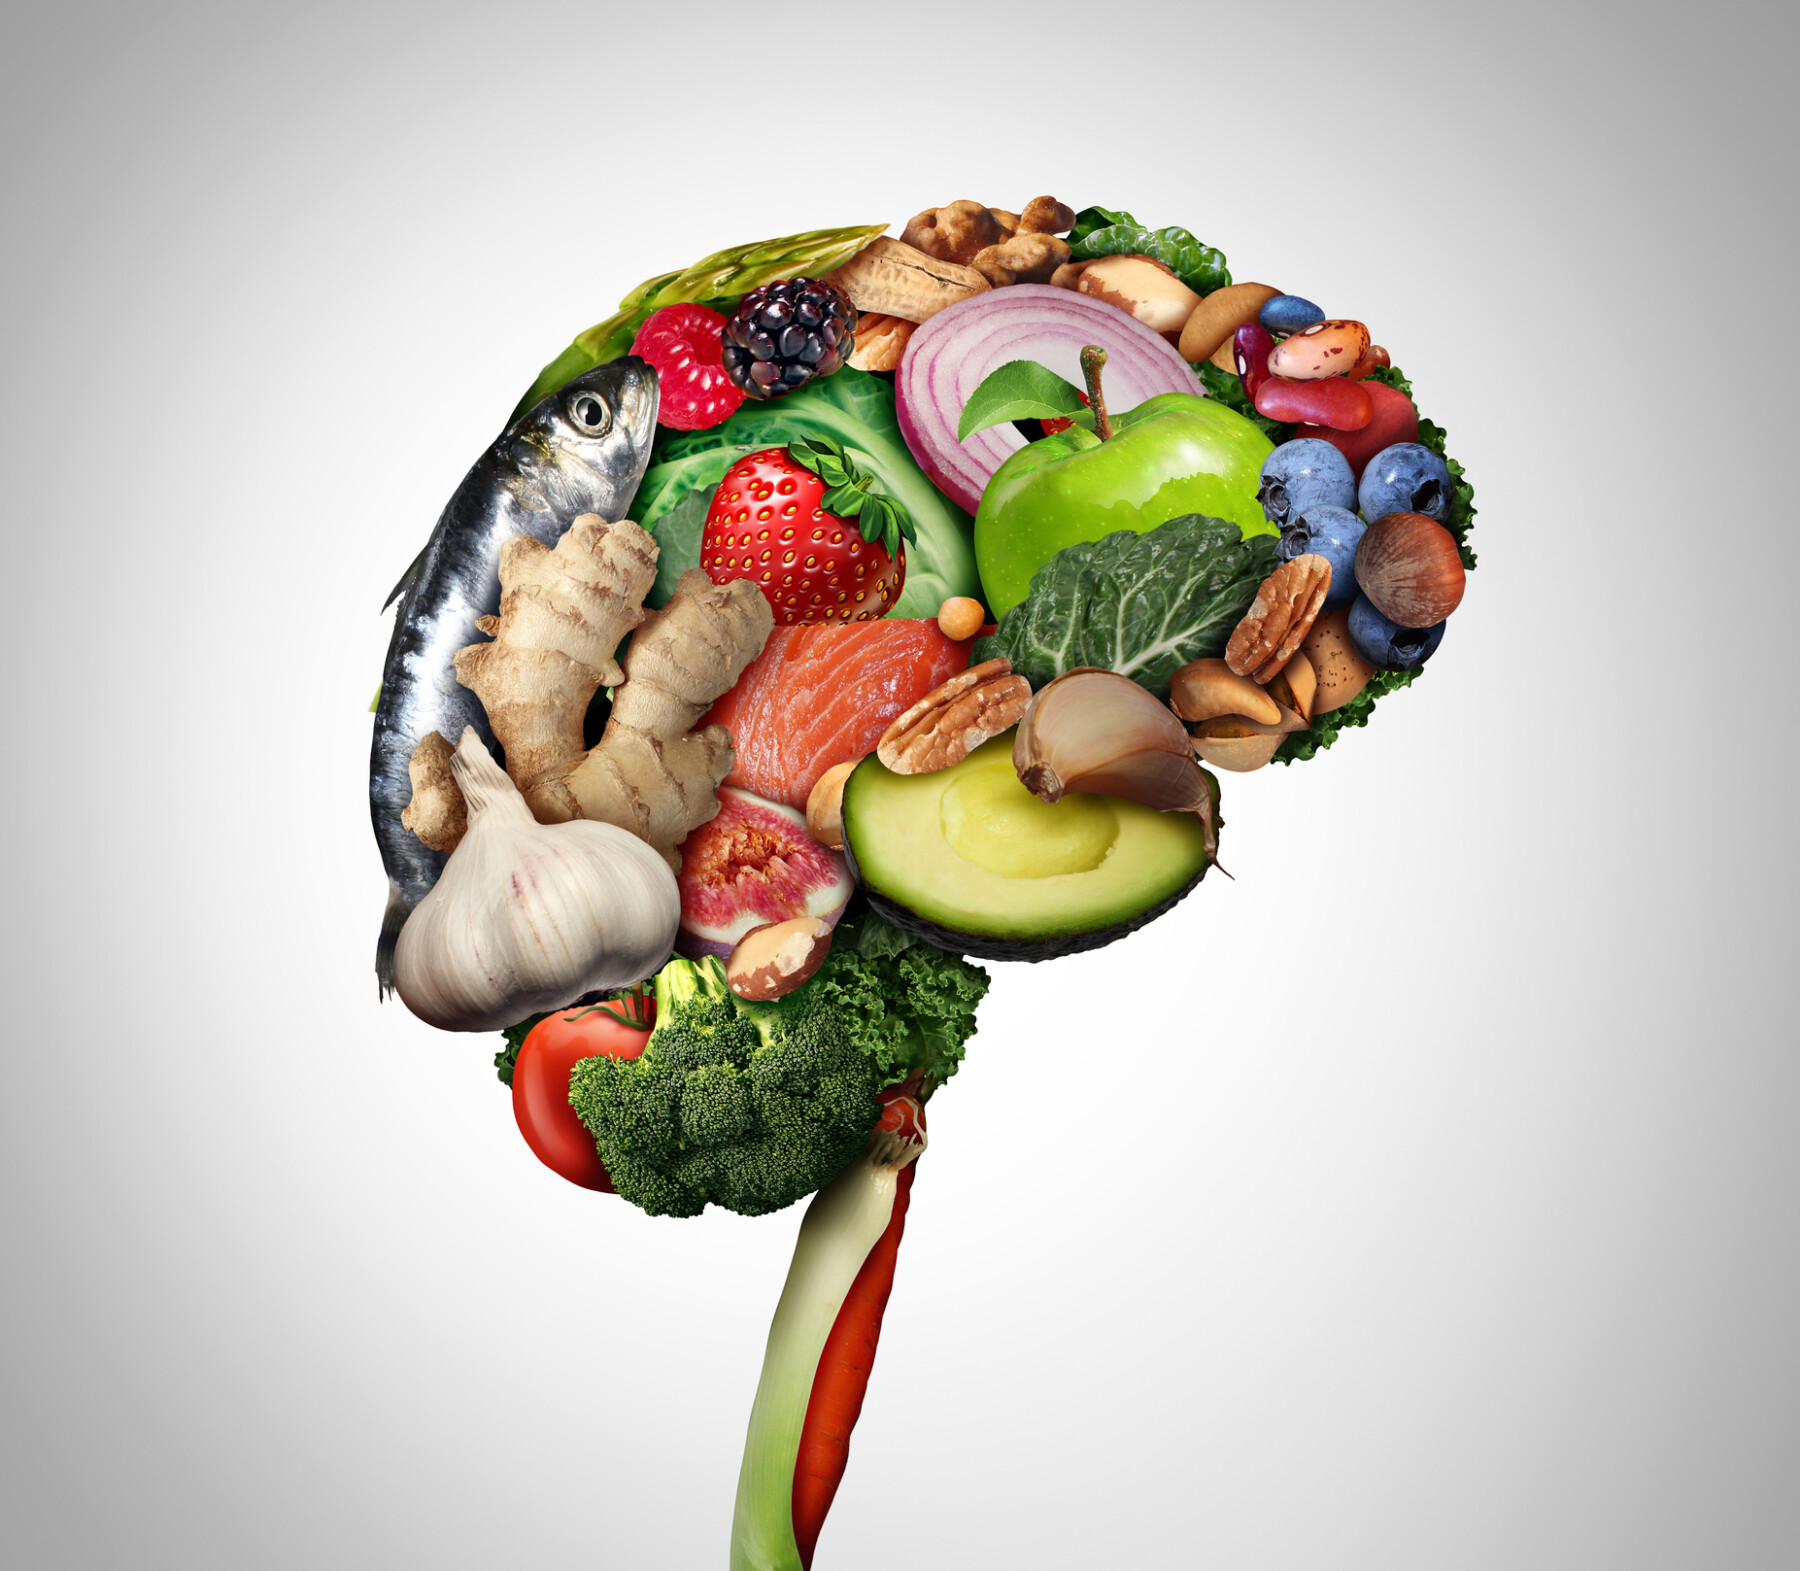 The burden of psychological distress and unhealthy dietary